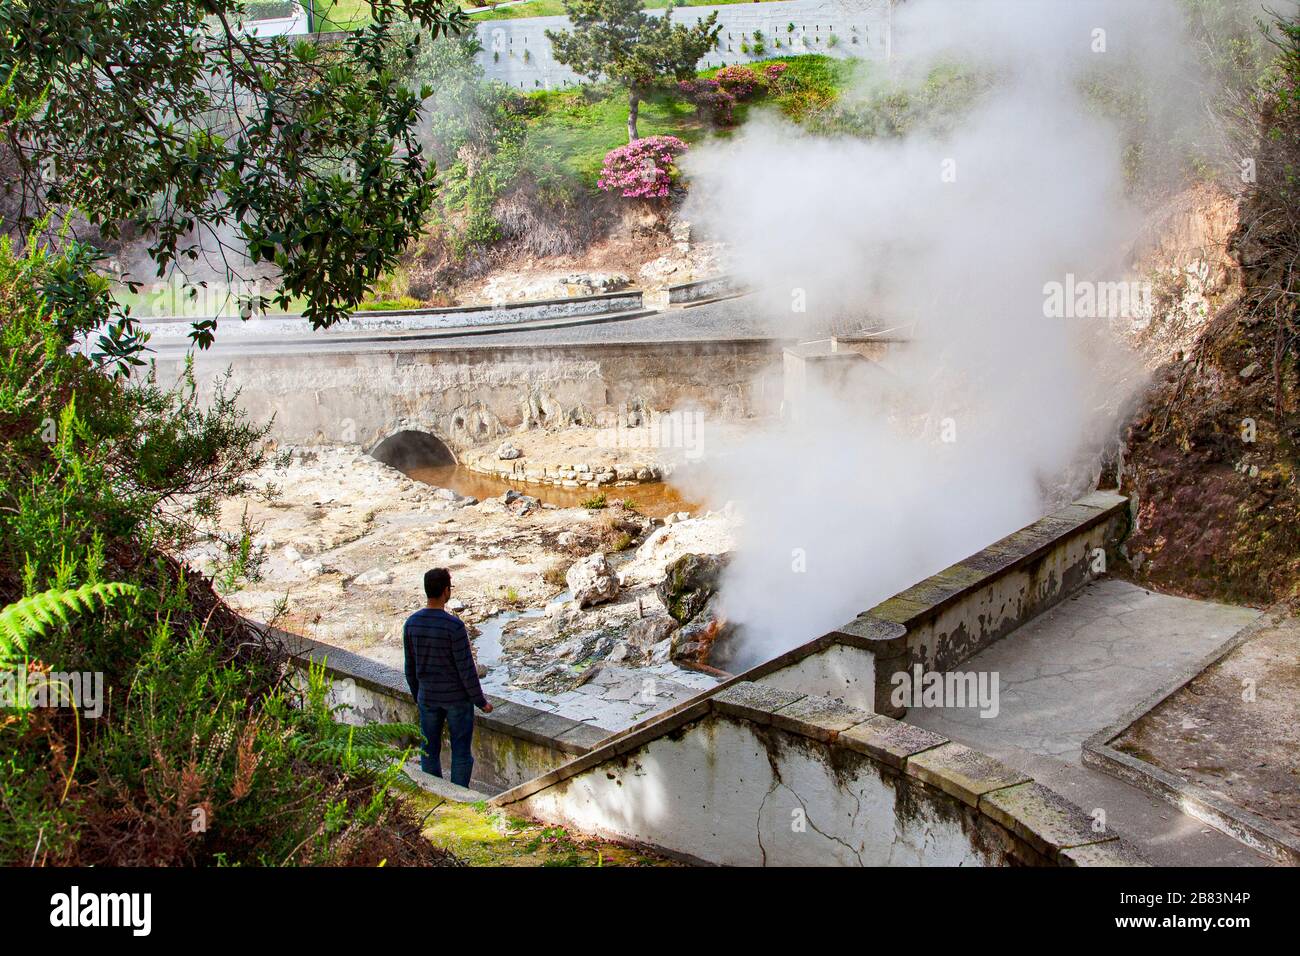 Portugal, Azores, Acores, Furnas, Caldieras, hot springs, volcanic, mineral springs, Stock Photo